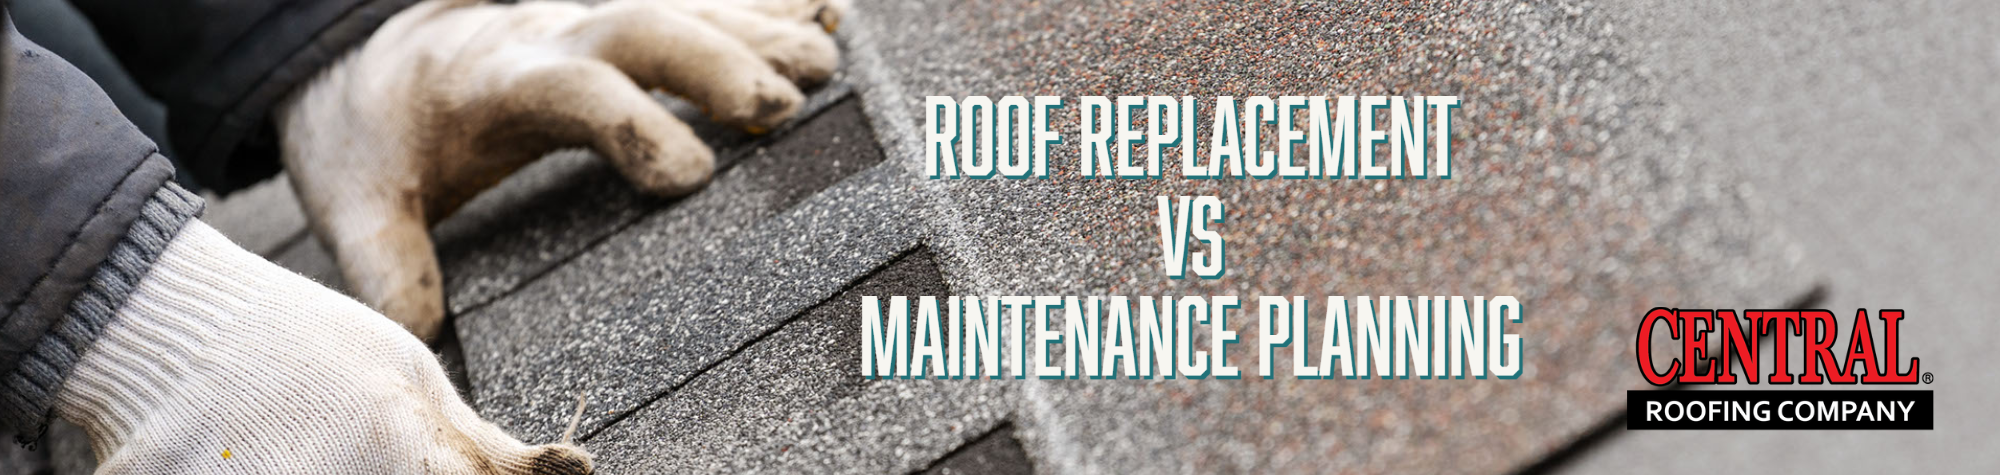 Roof Replacement vs Maintenance Planning?  Have the conversation with a professional.